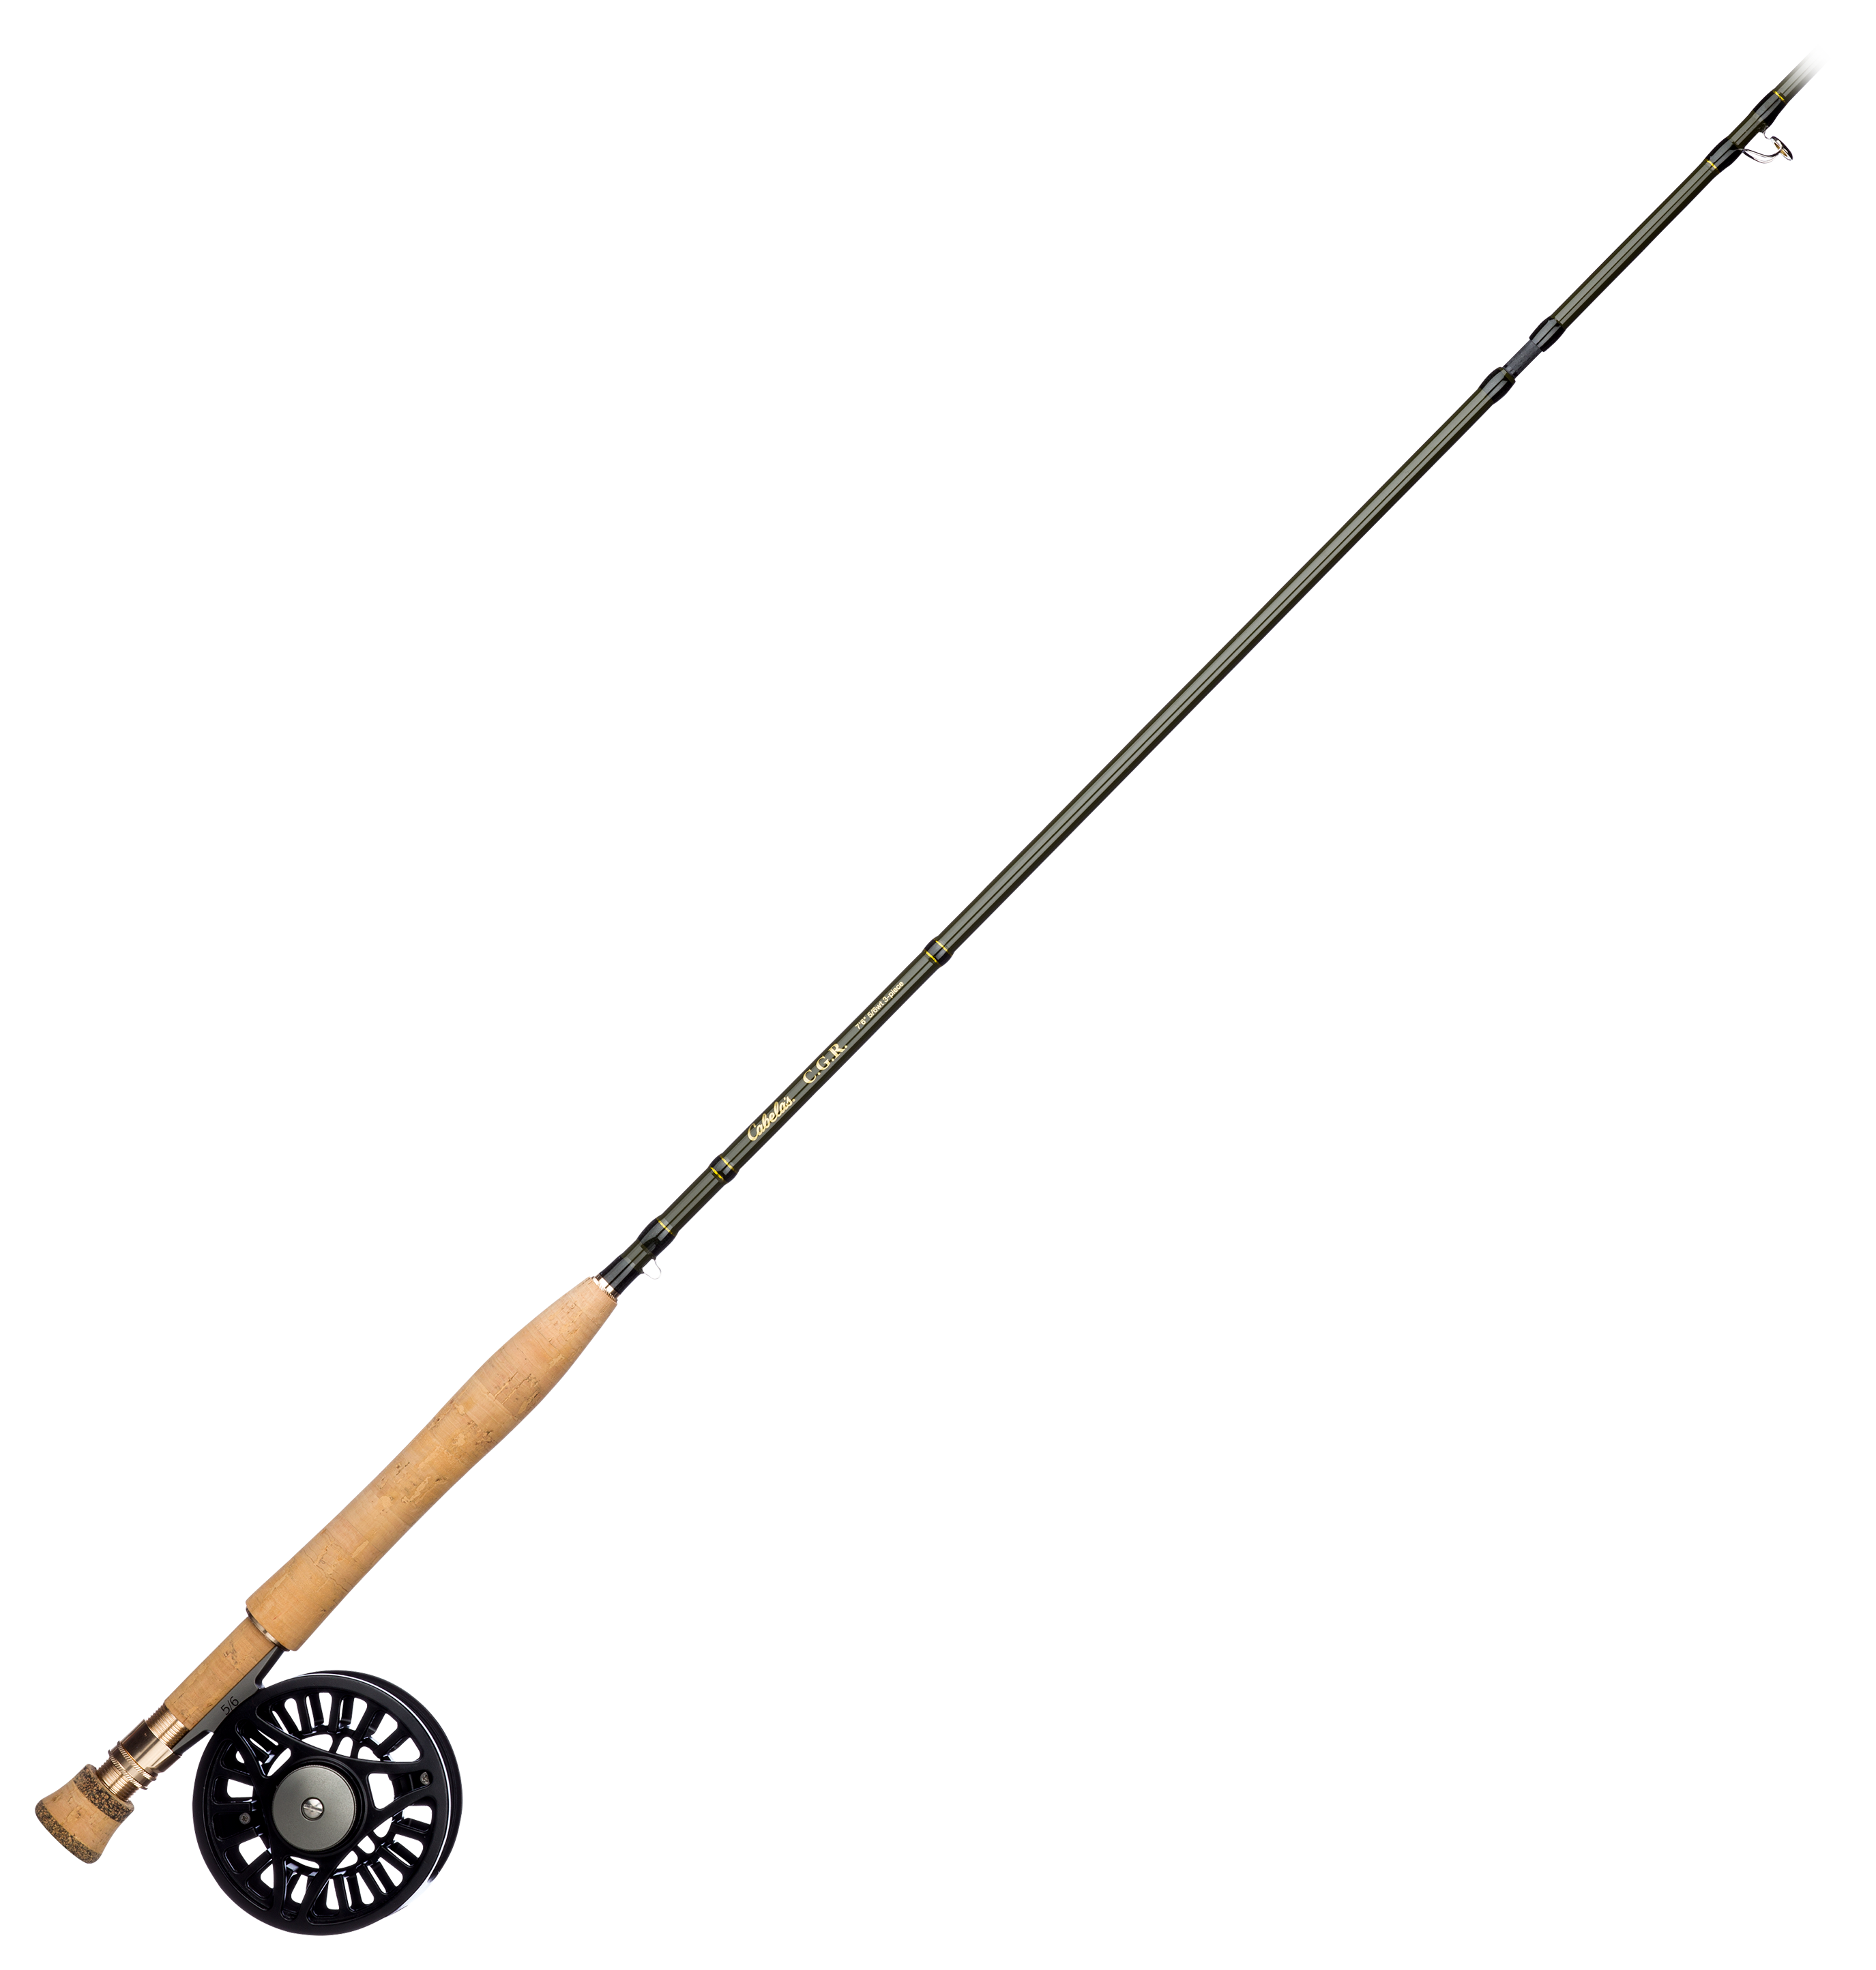 Cabela's Prestige II Reel and CGR Rod Fly Outfit - CGR5933/PPII-34